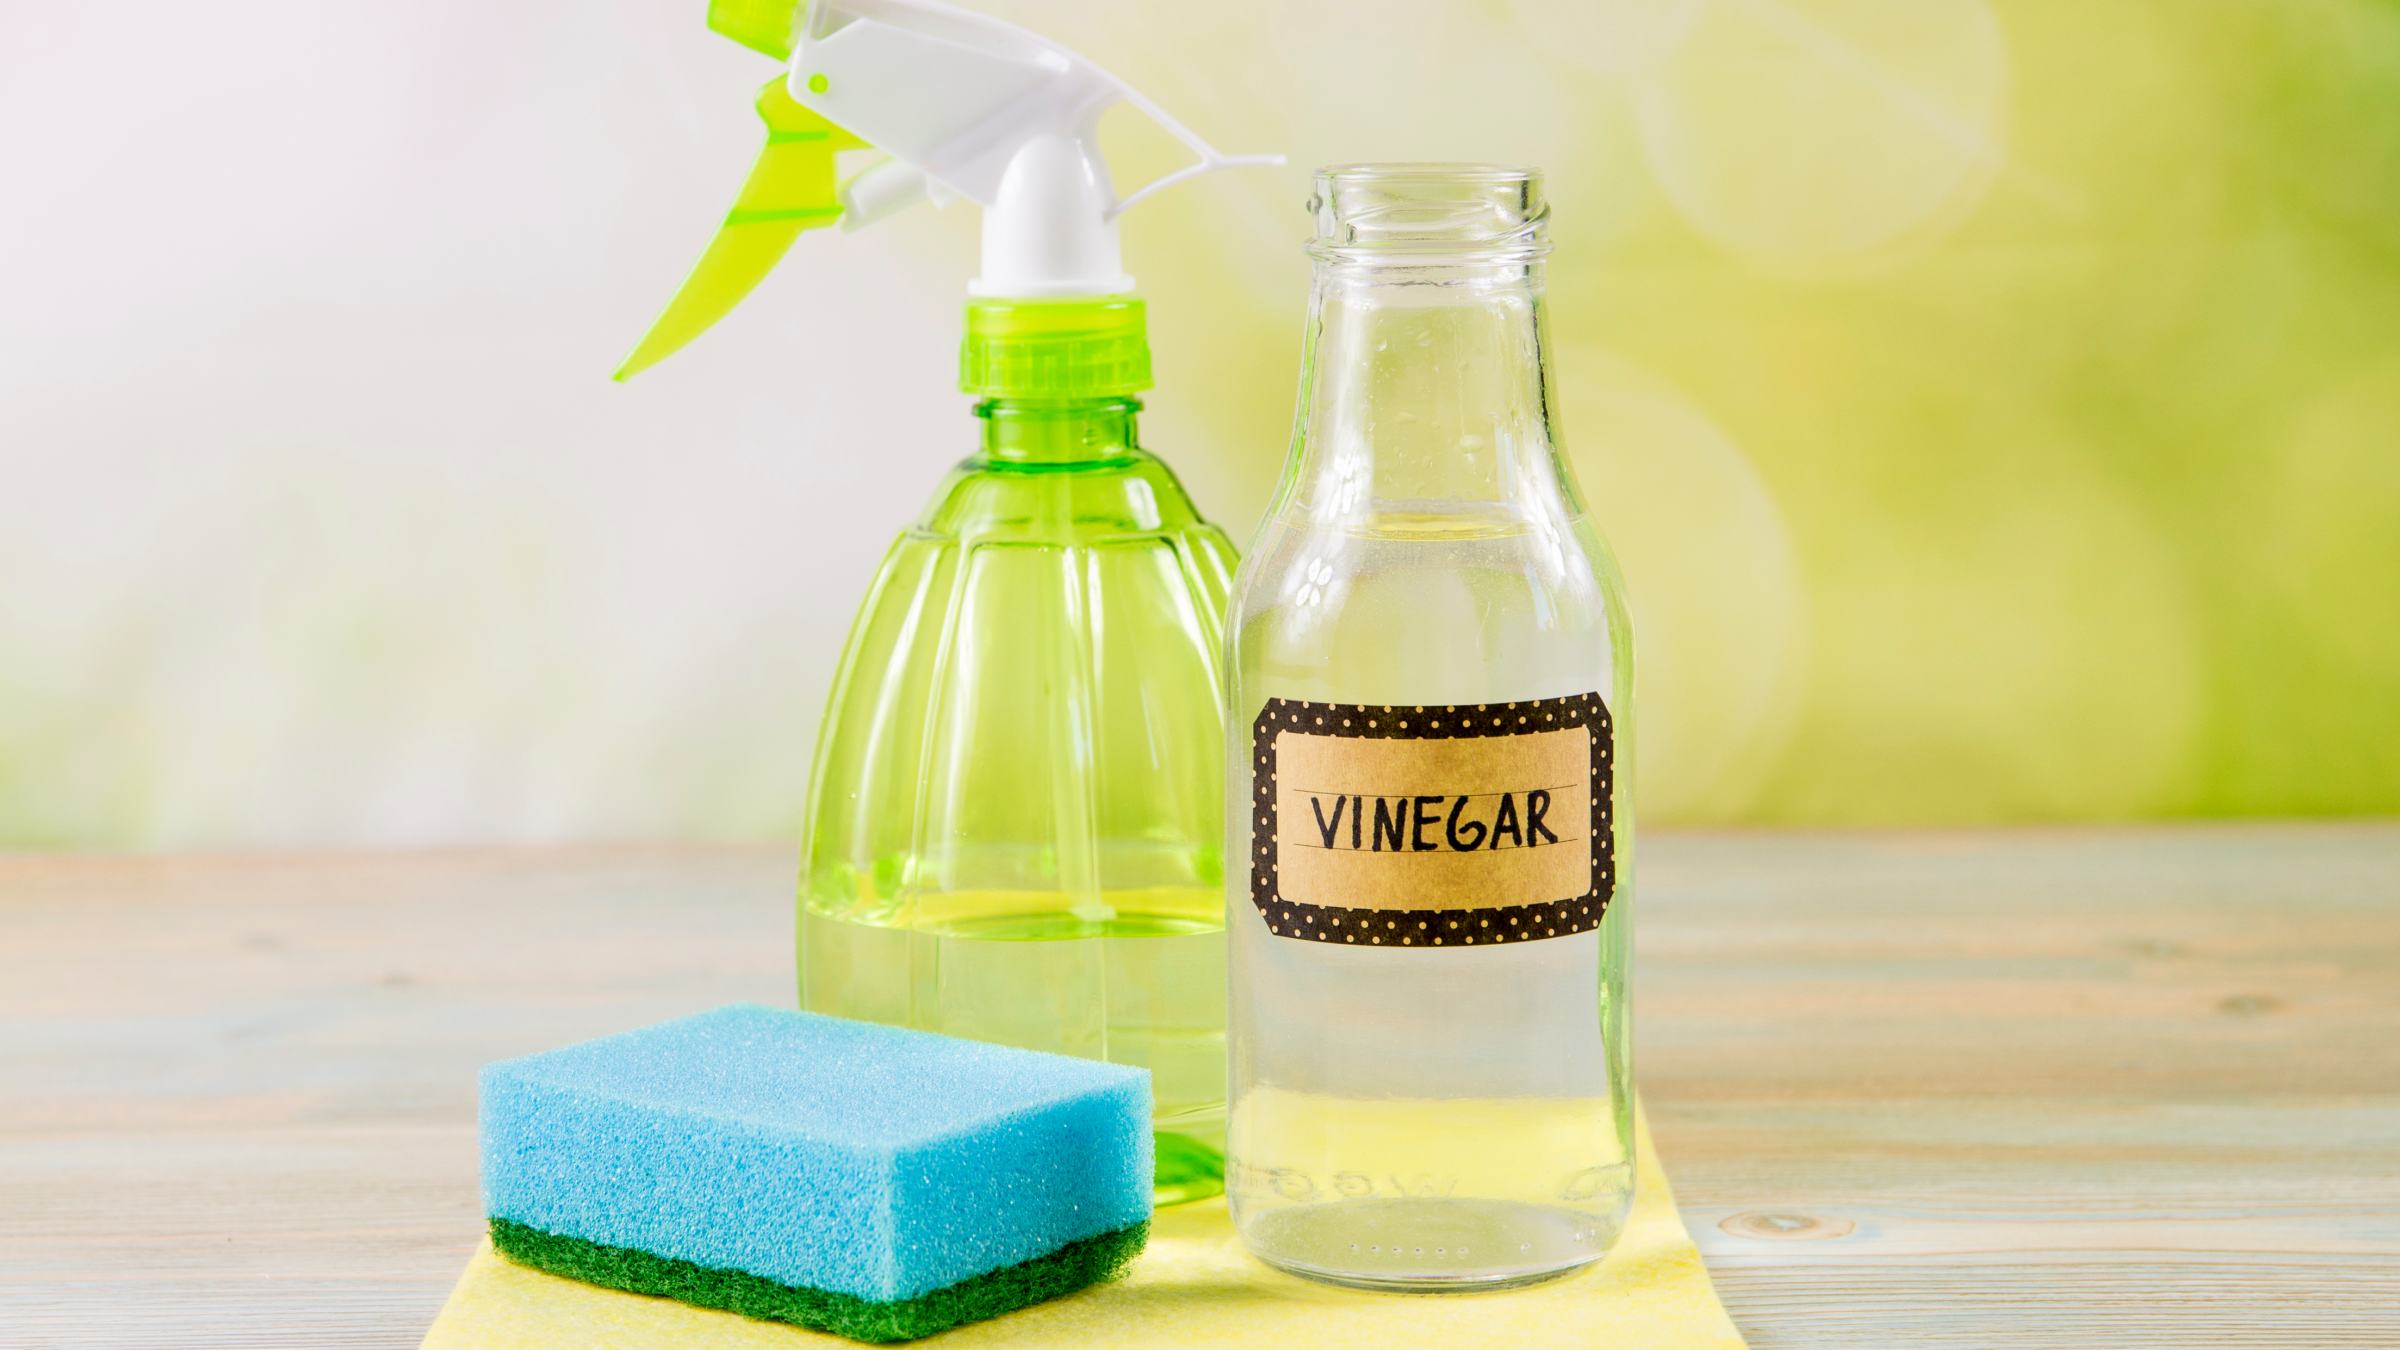 Which is more effective for cleaning, white wine vinegar or white vinegar